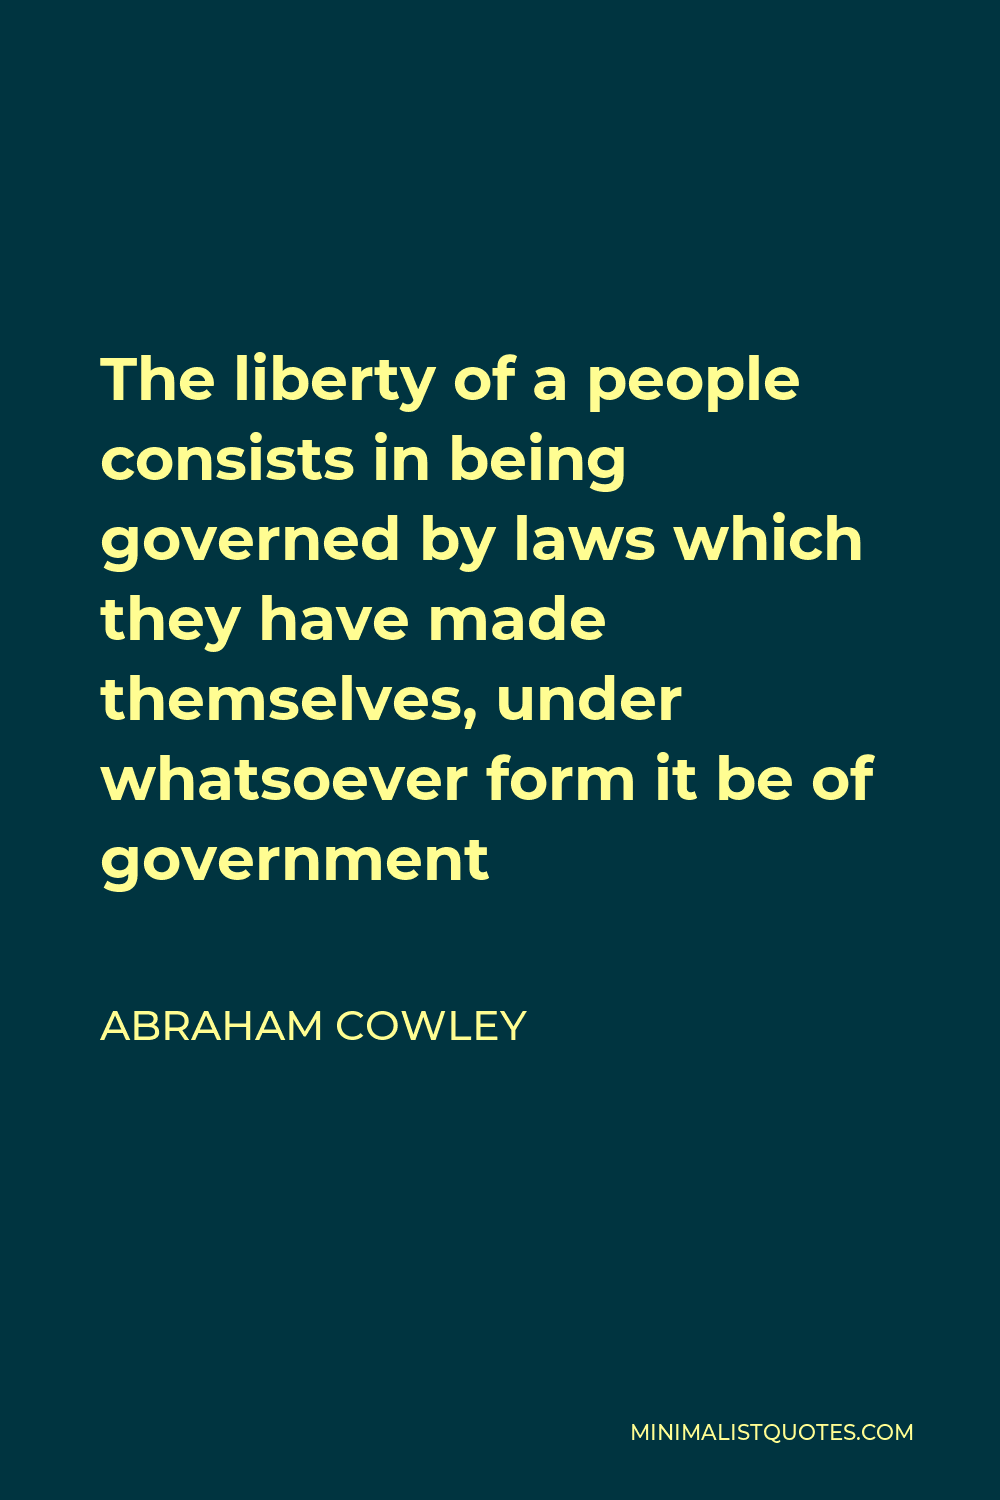 Abraham Cowley Quote - The liberty of a people consists in being governed by laws which they have made themselves, under whatsoever form it be of government